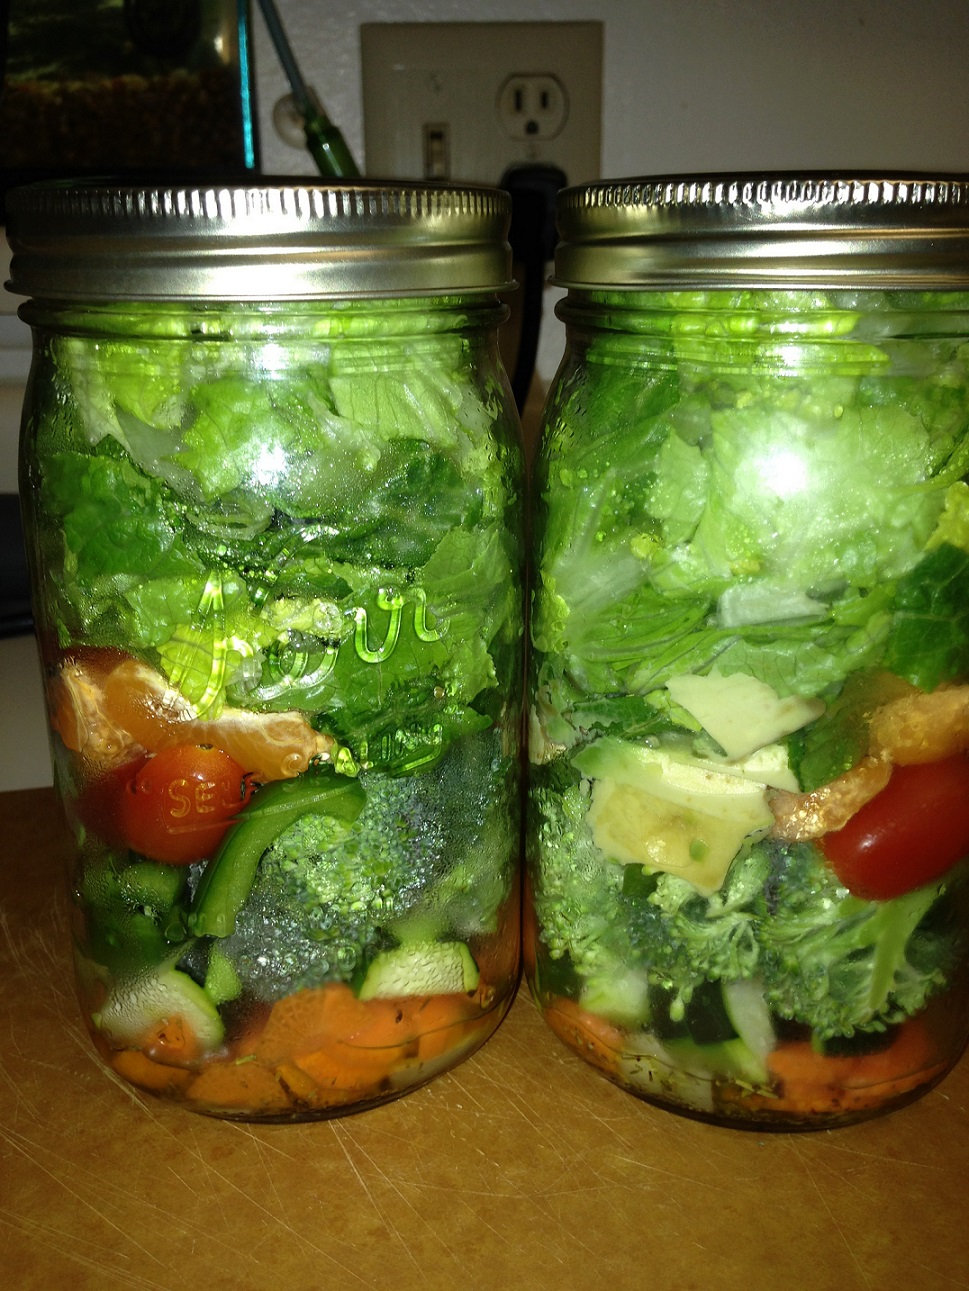 Salad in a jar photo by midwesternrose